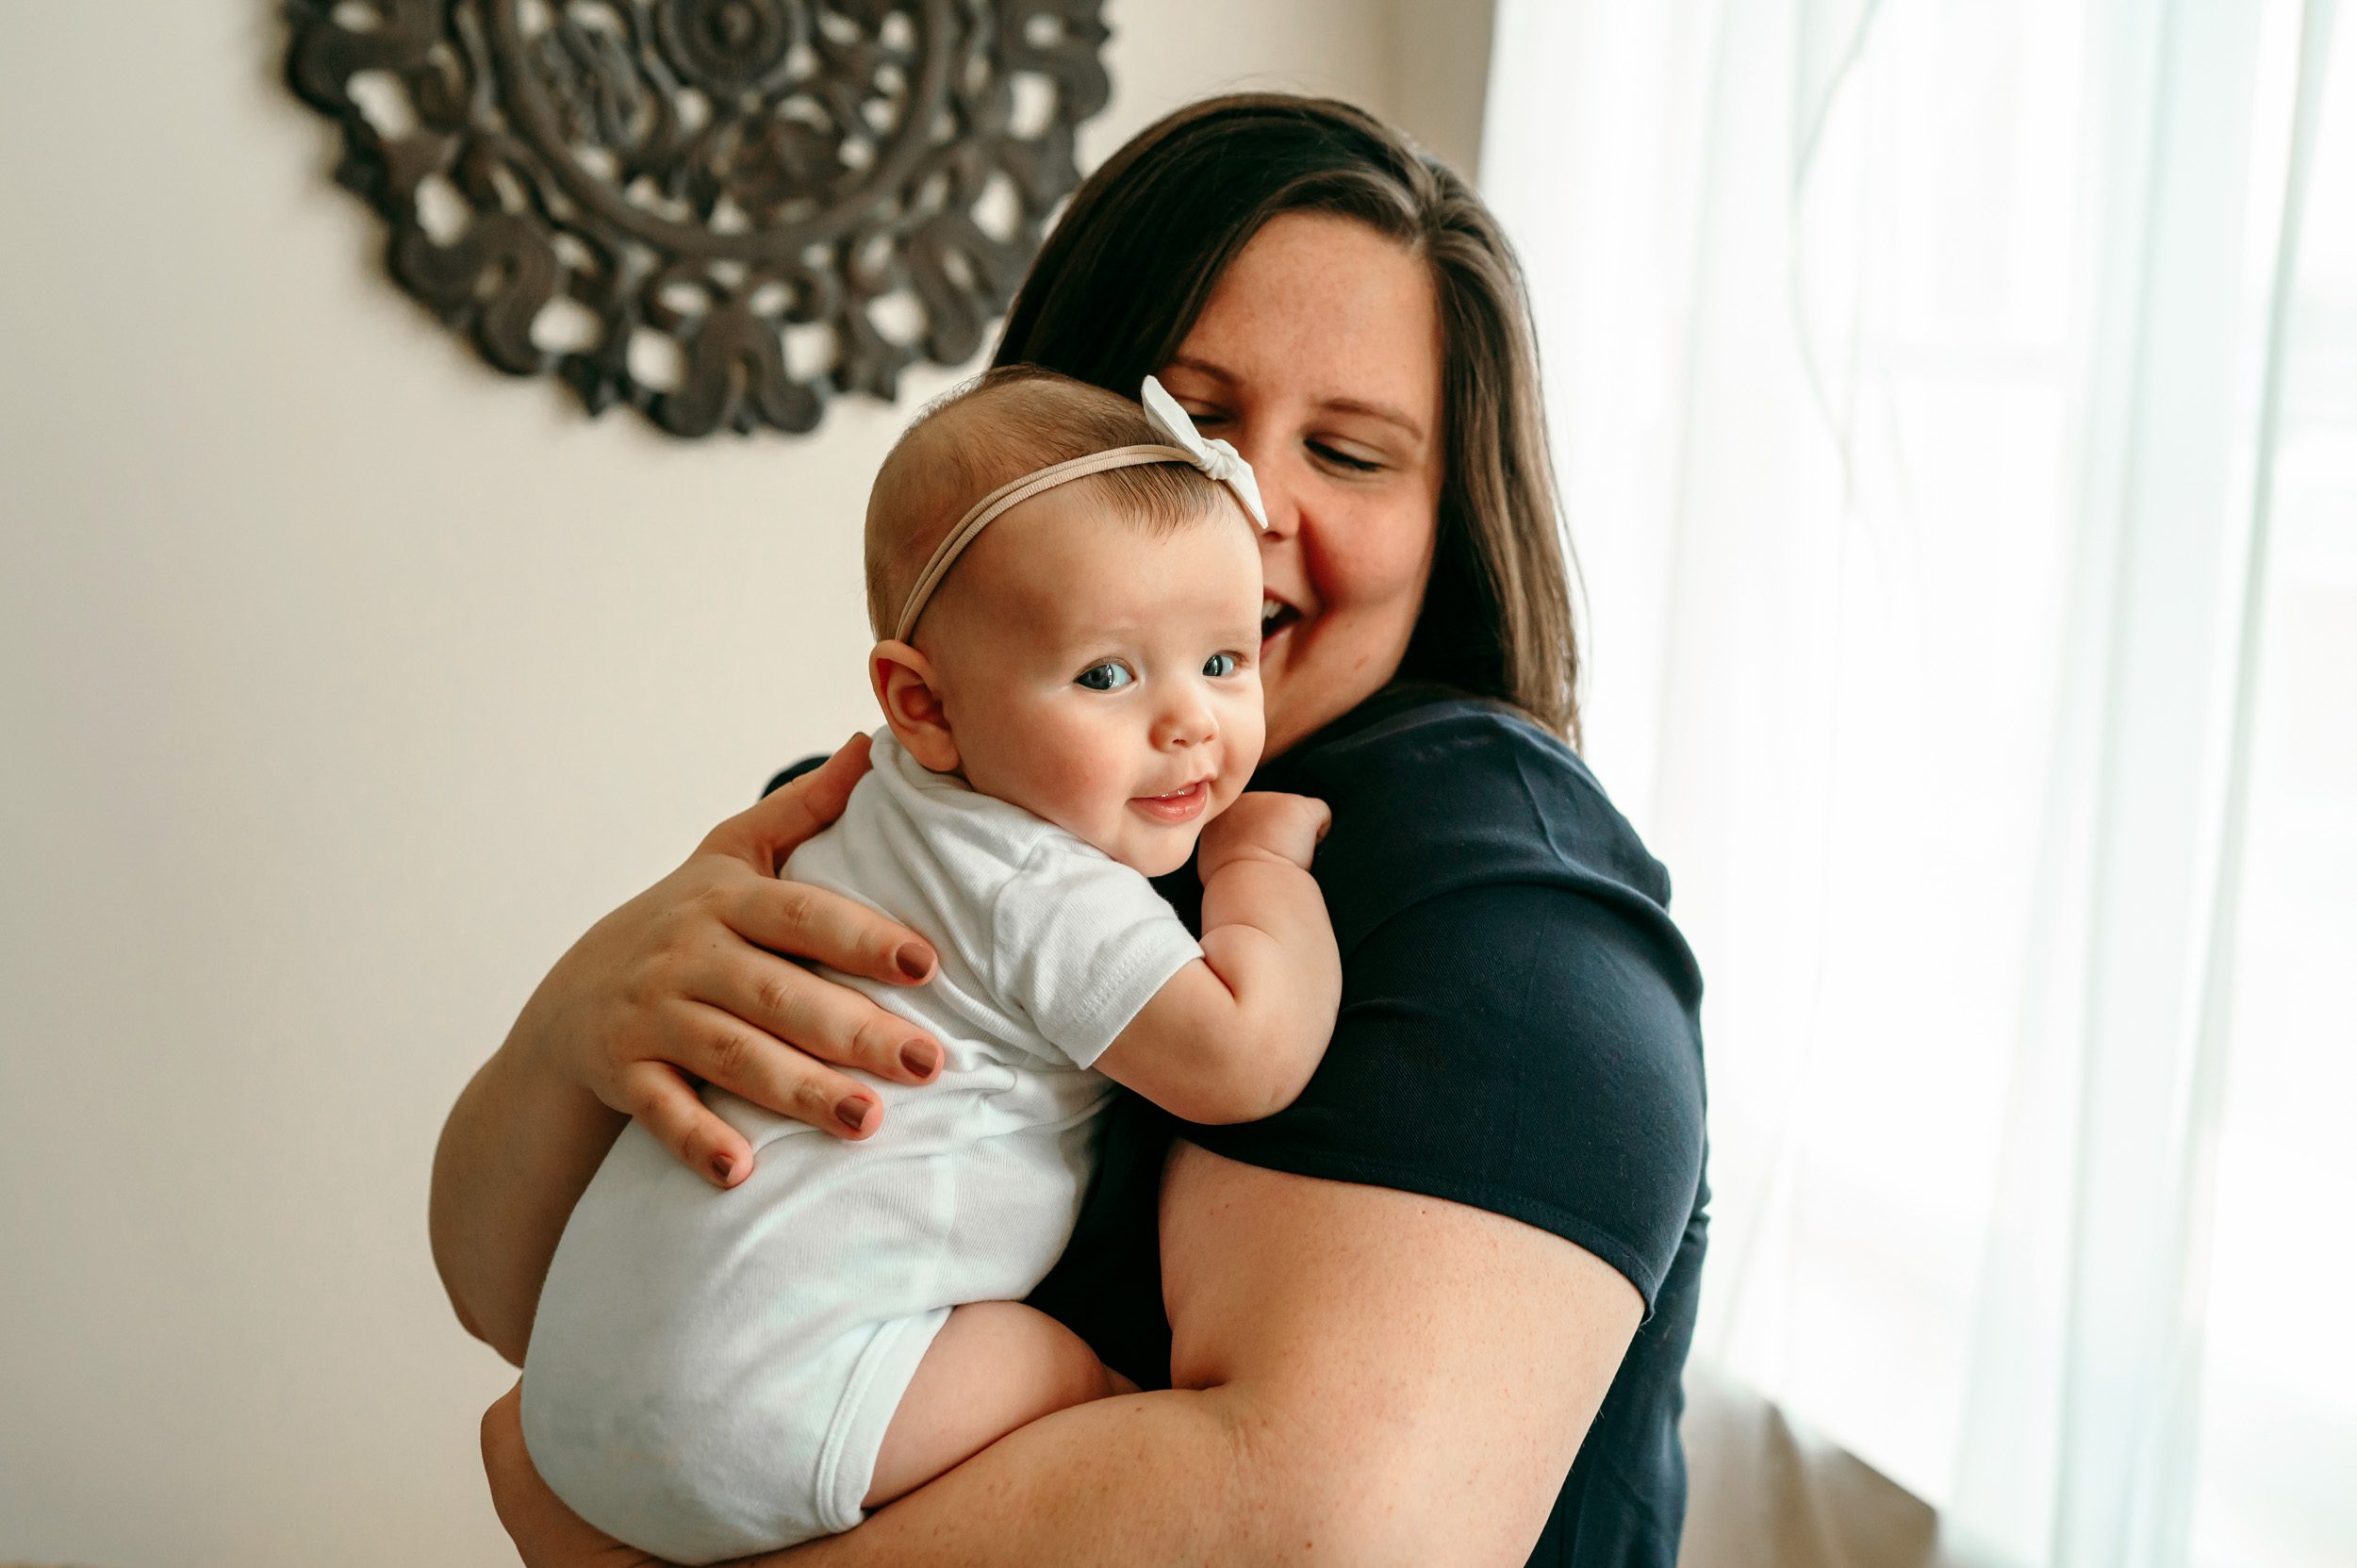 A baby girl looking back toward the camera and smiling while her mom holds her in her arms during a home newborn photoshoot